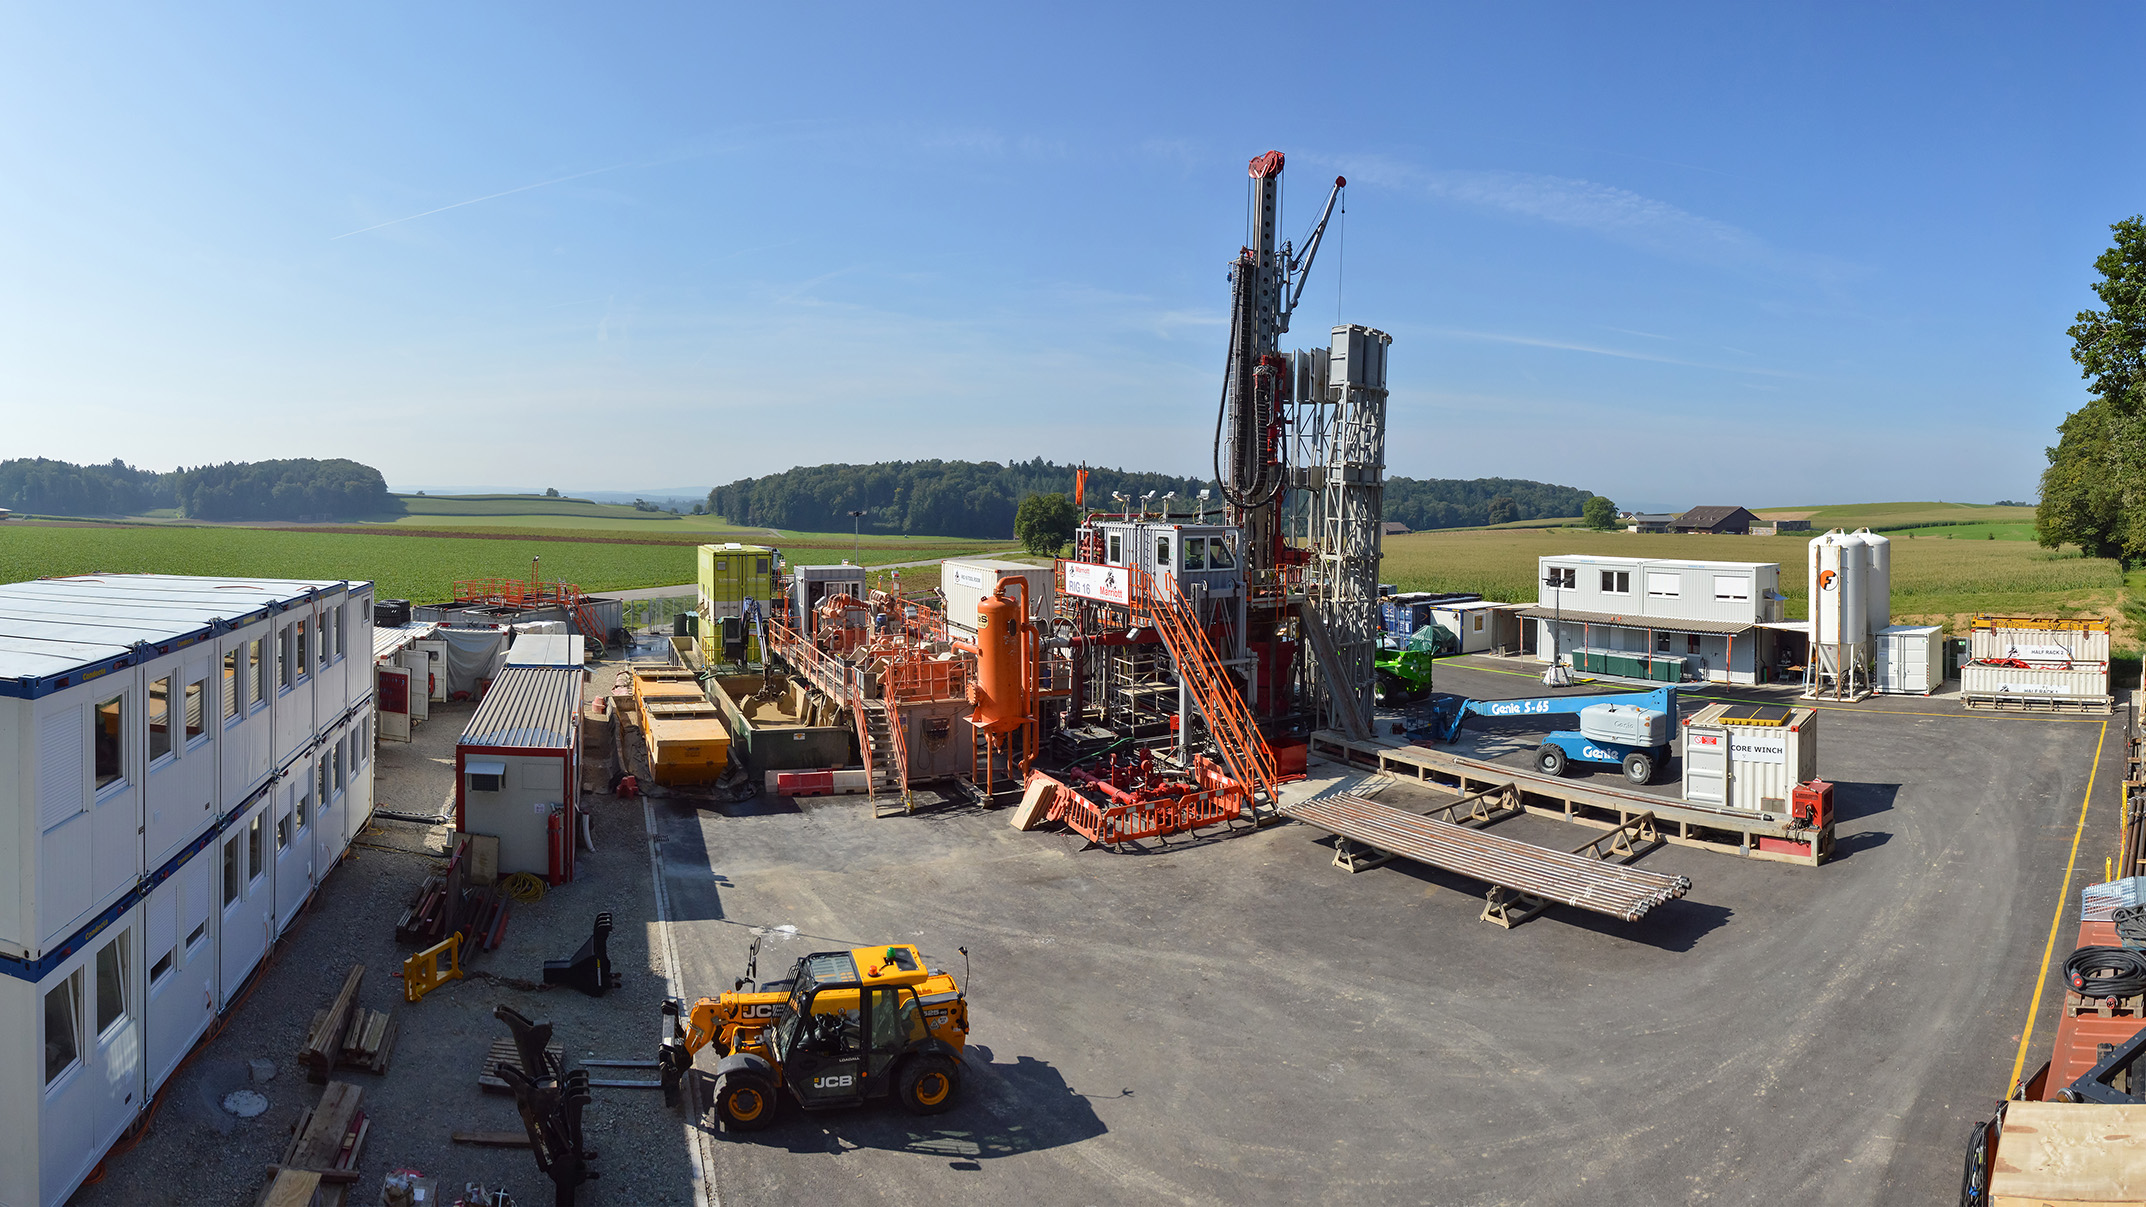 Trüllikon-1 in the siting region Zürich Nordost – one of the borehole sites where Nagra is extracting drill cores © Nagra